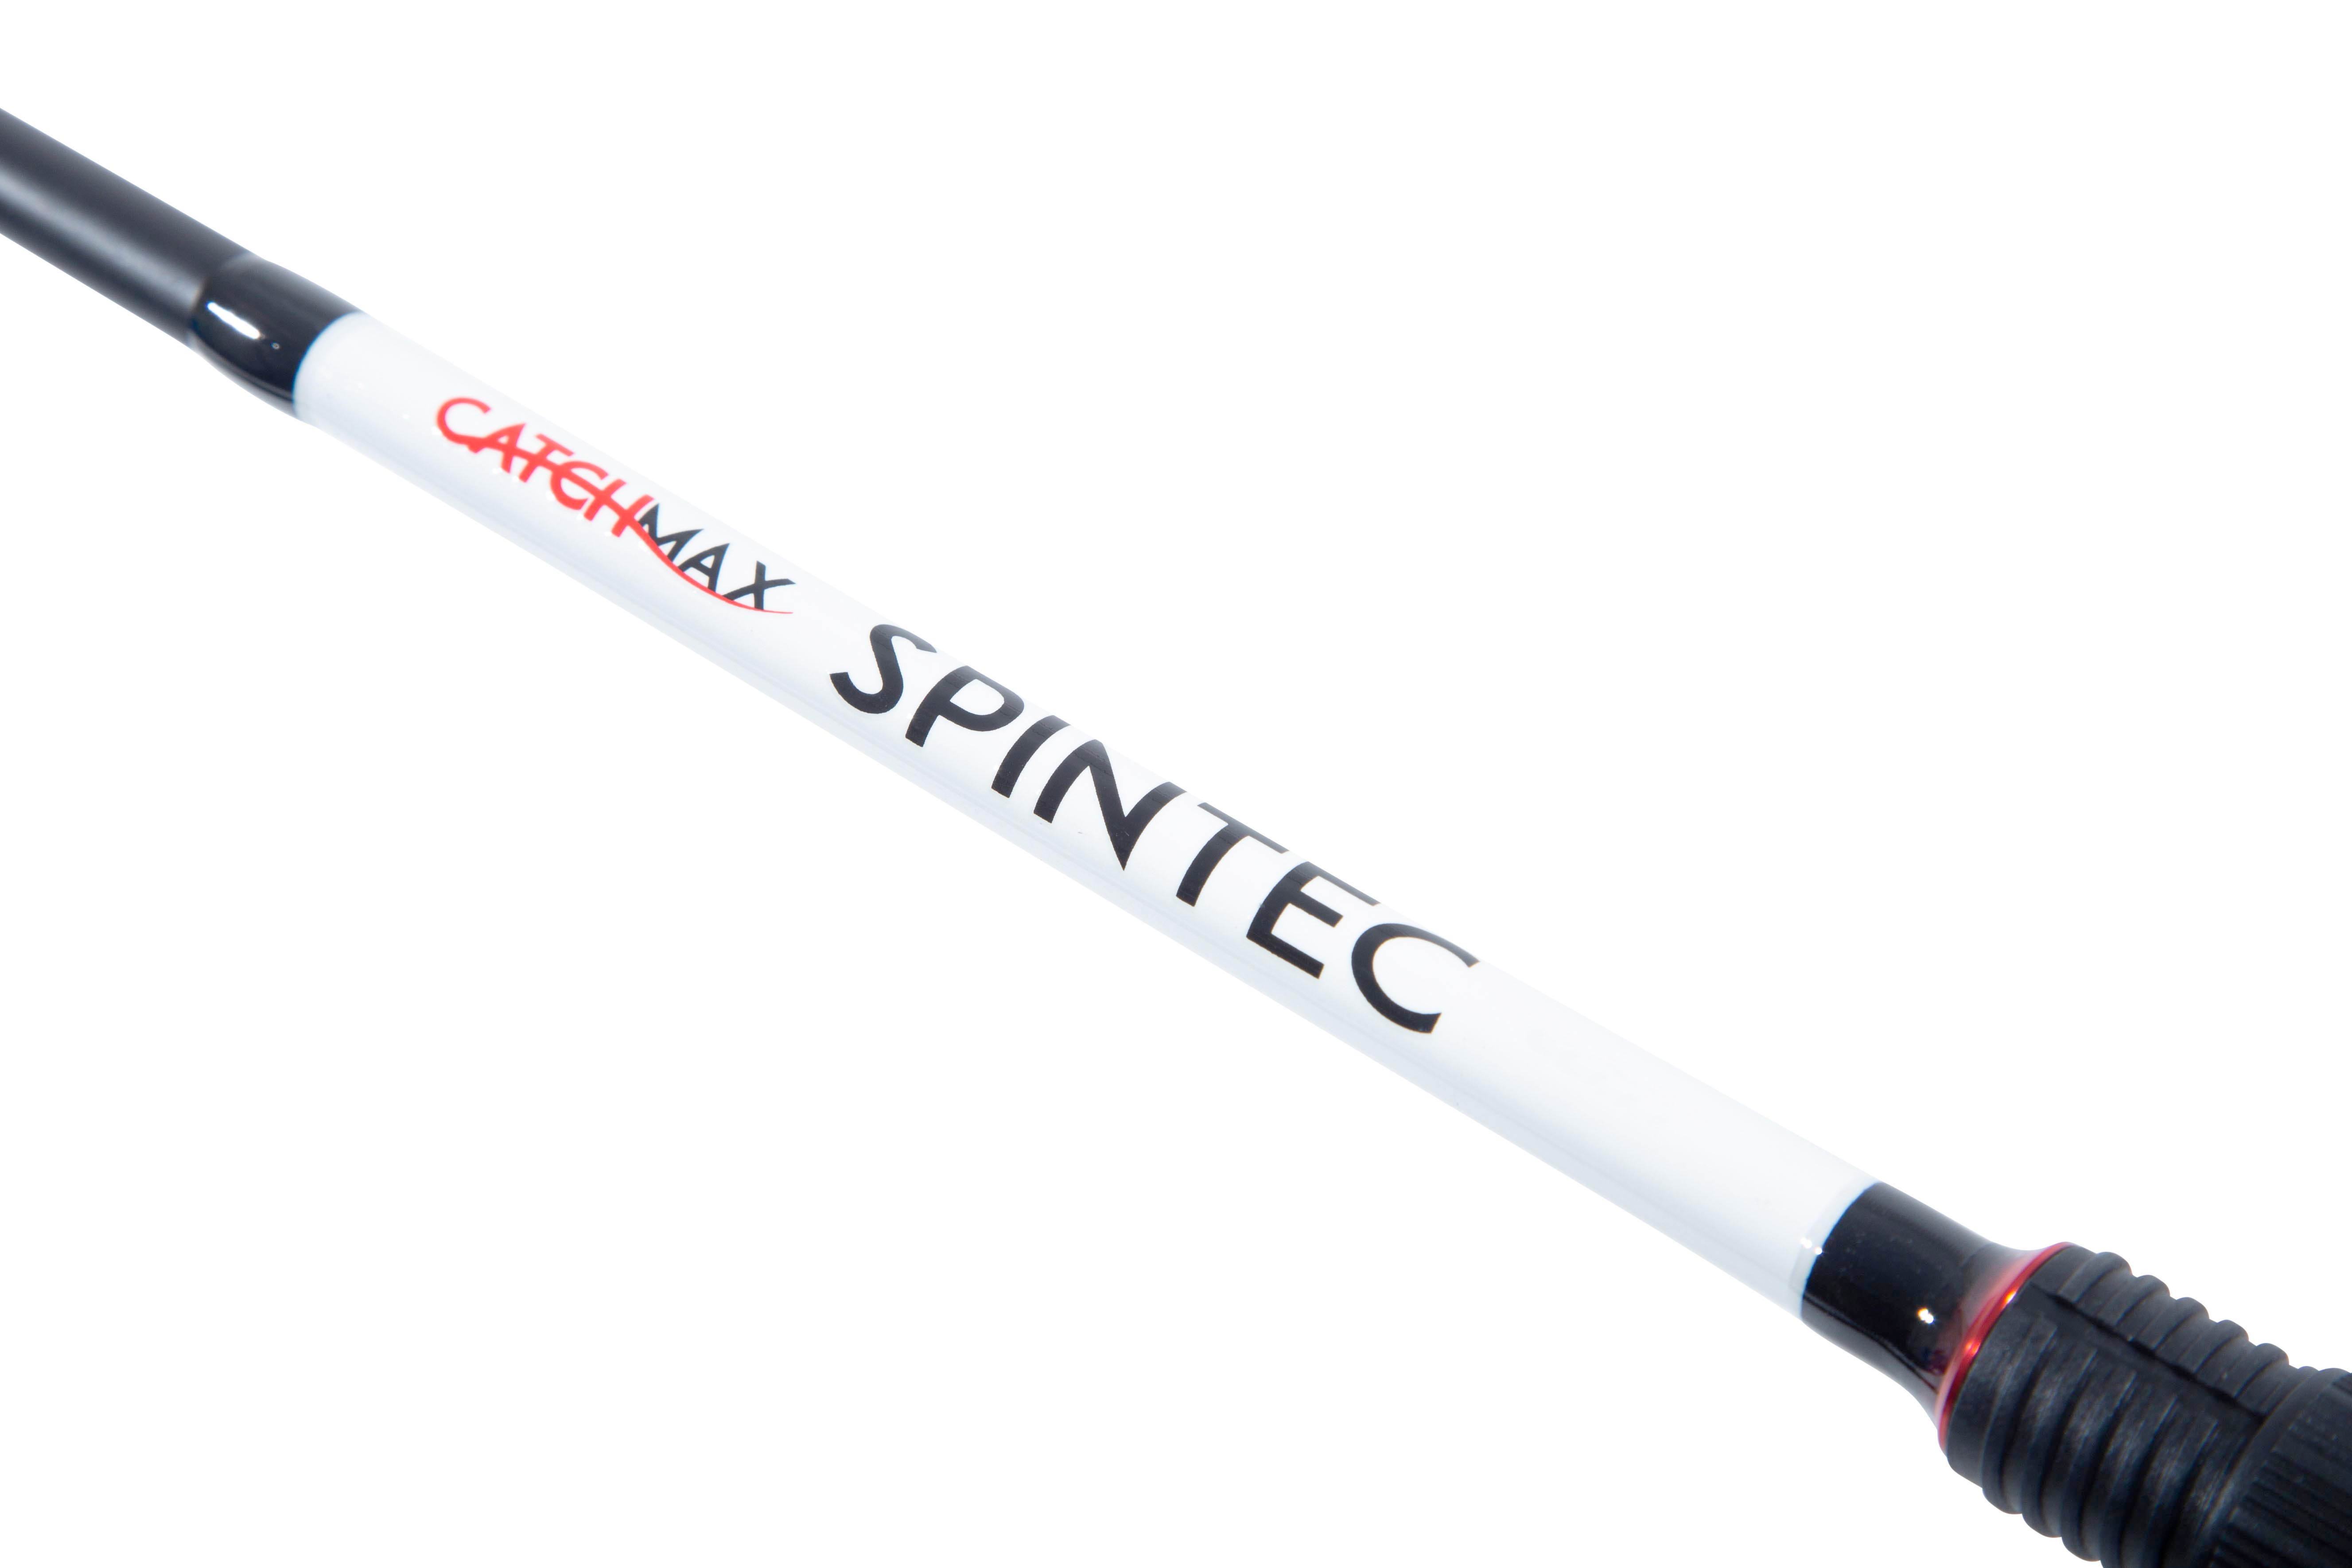 Set Combo Canna Catchmax Spintec